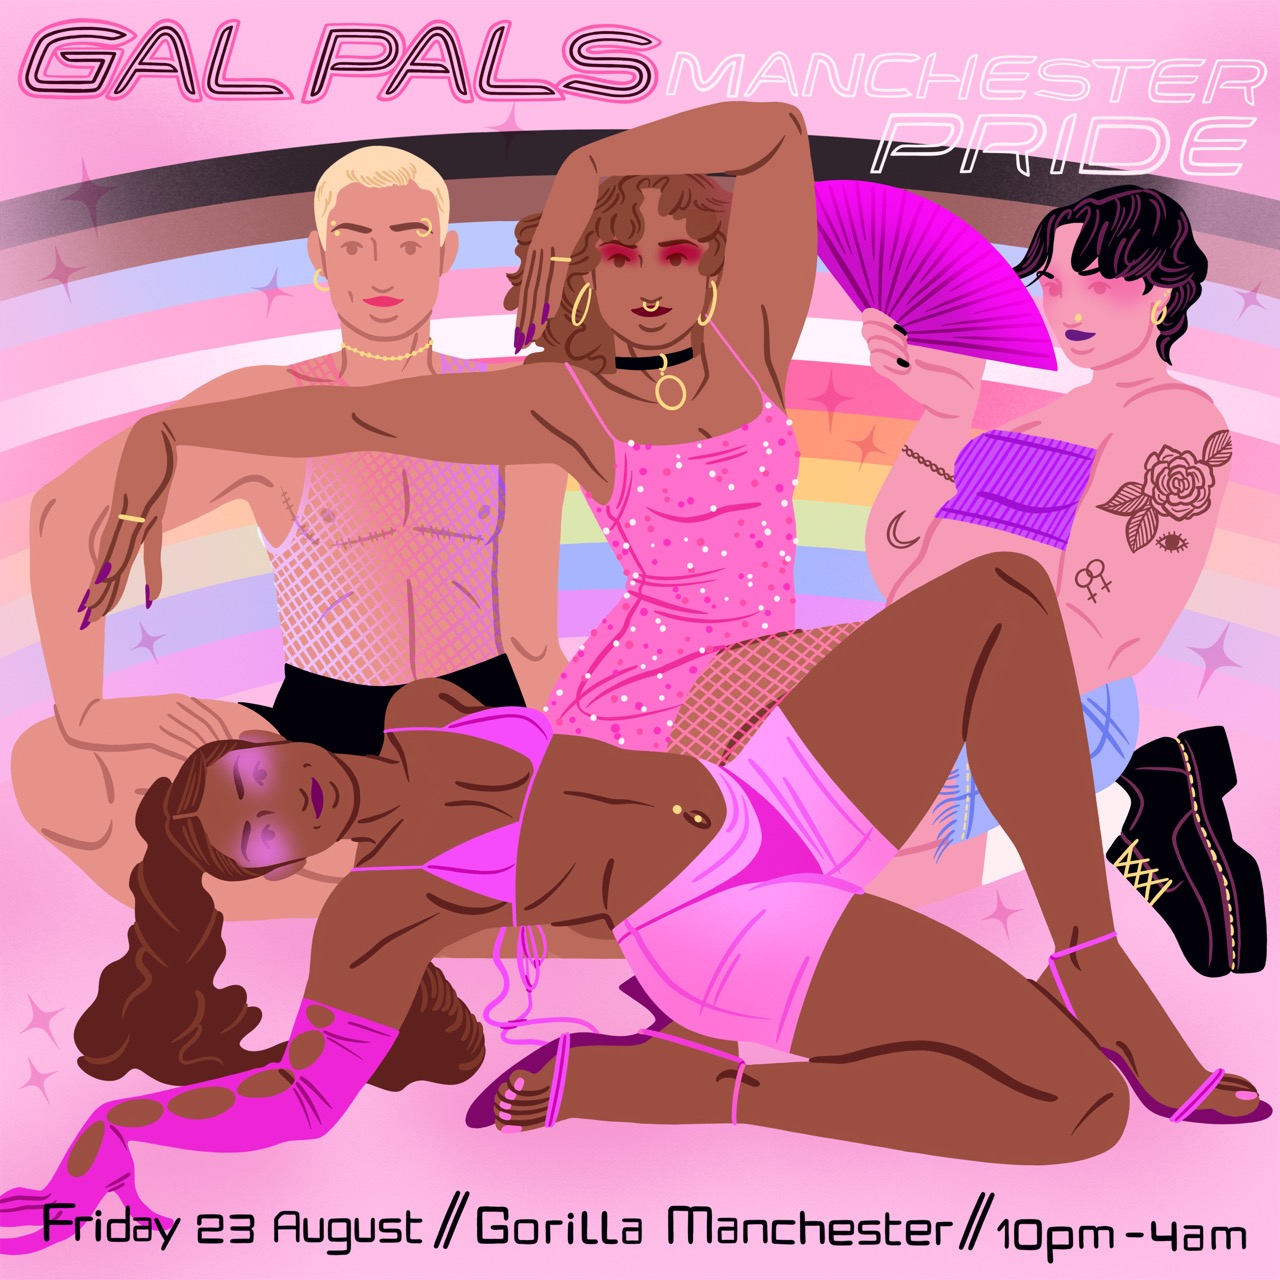 Gal Pals: Manchester Pride